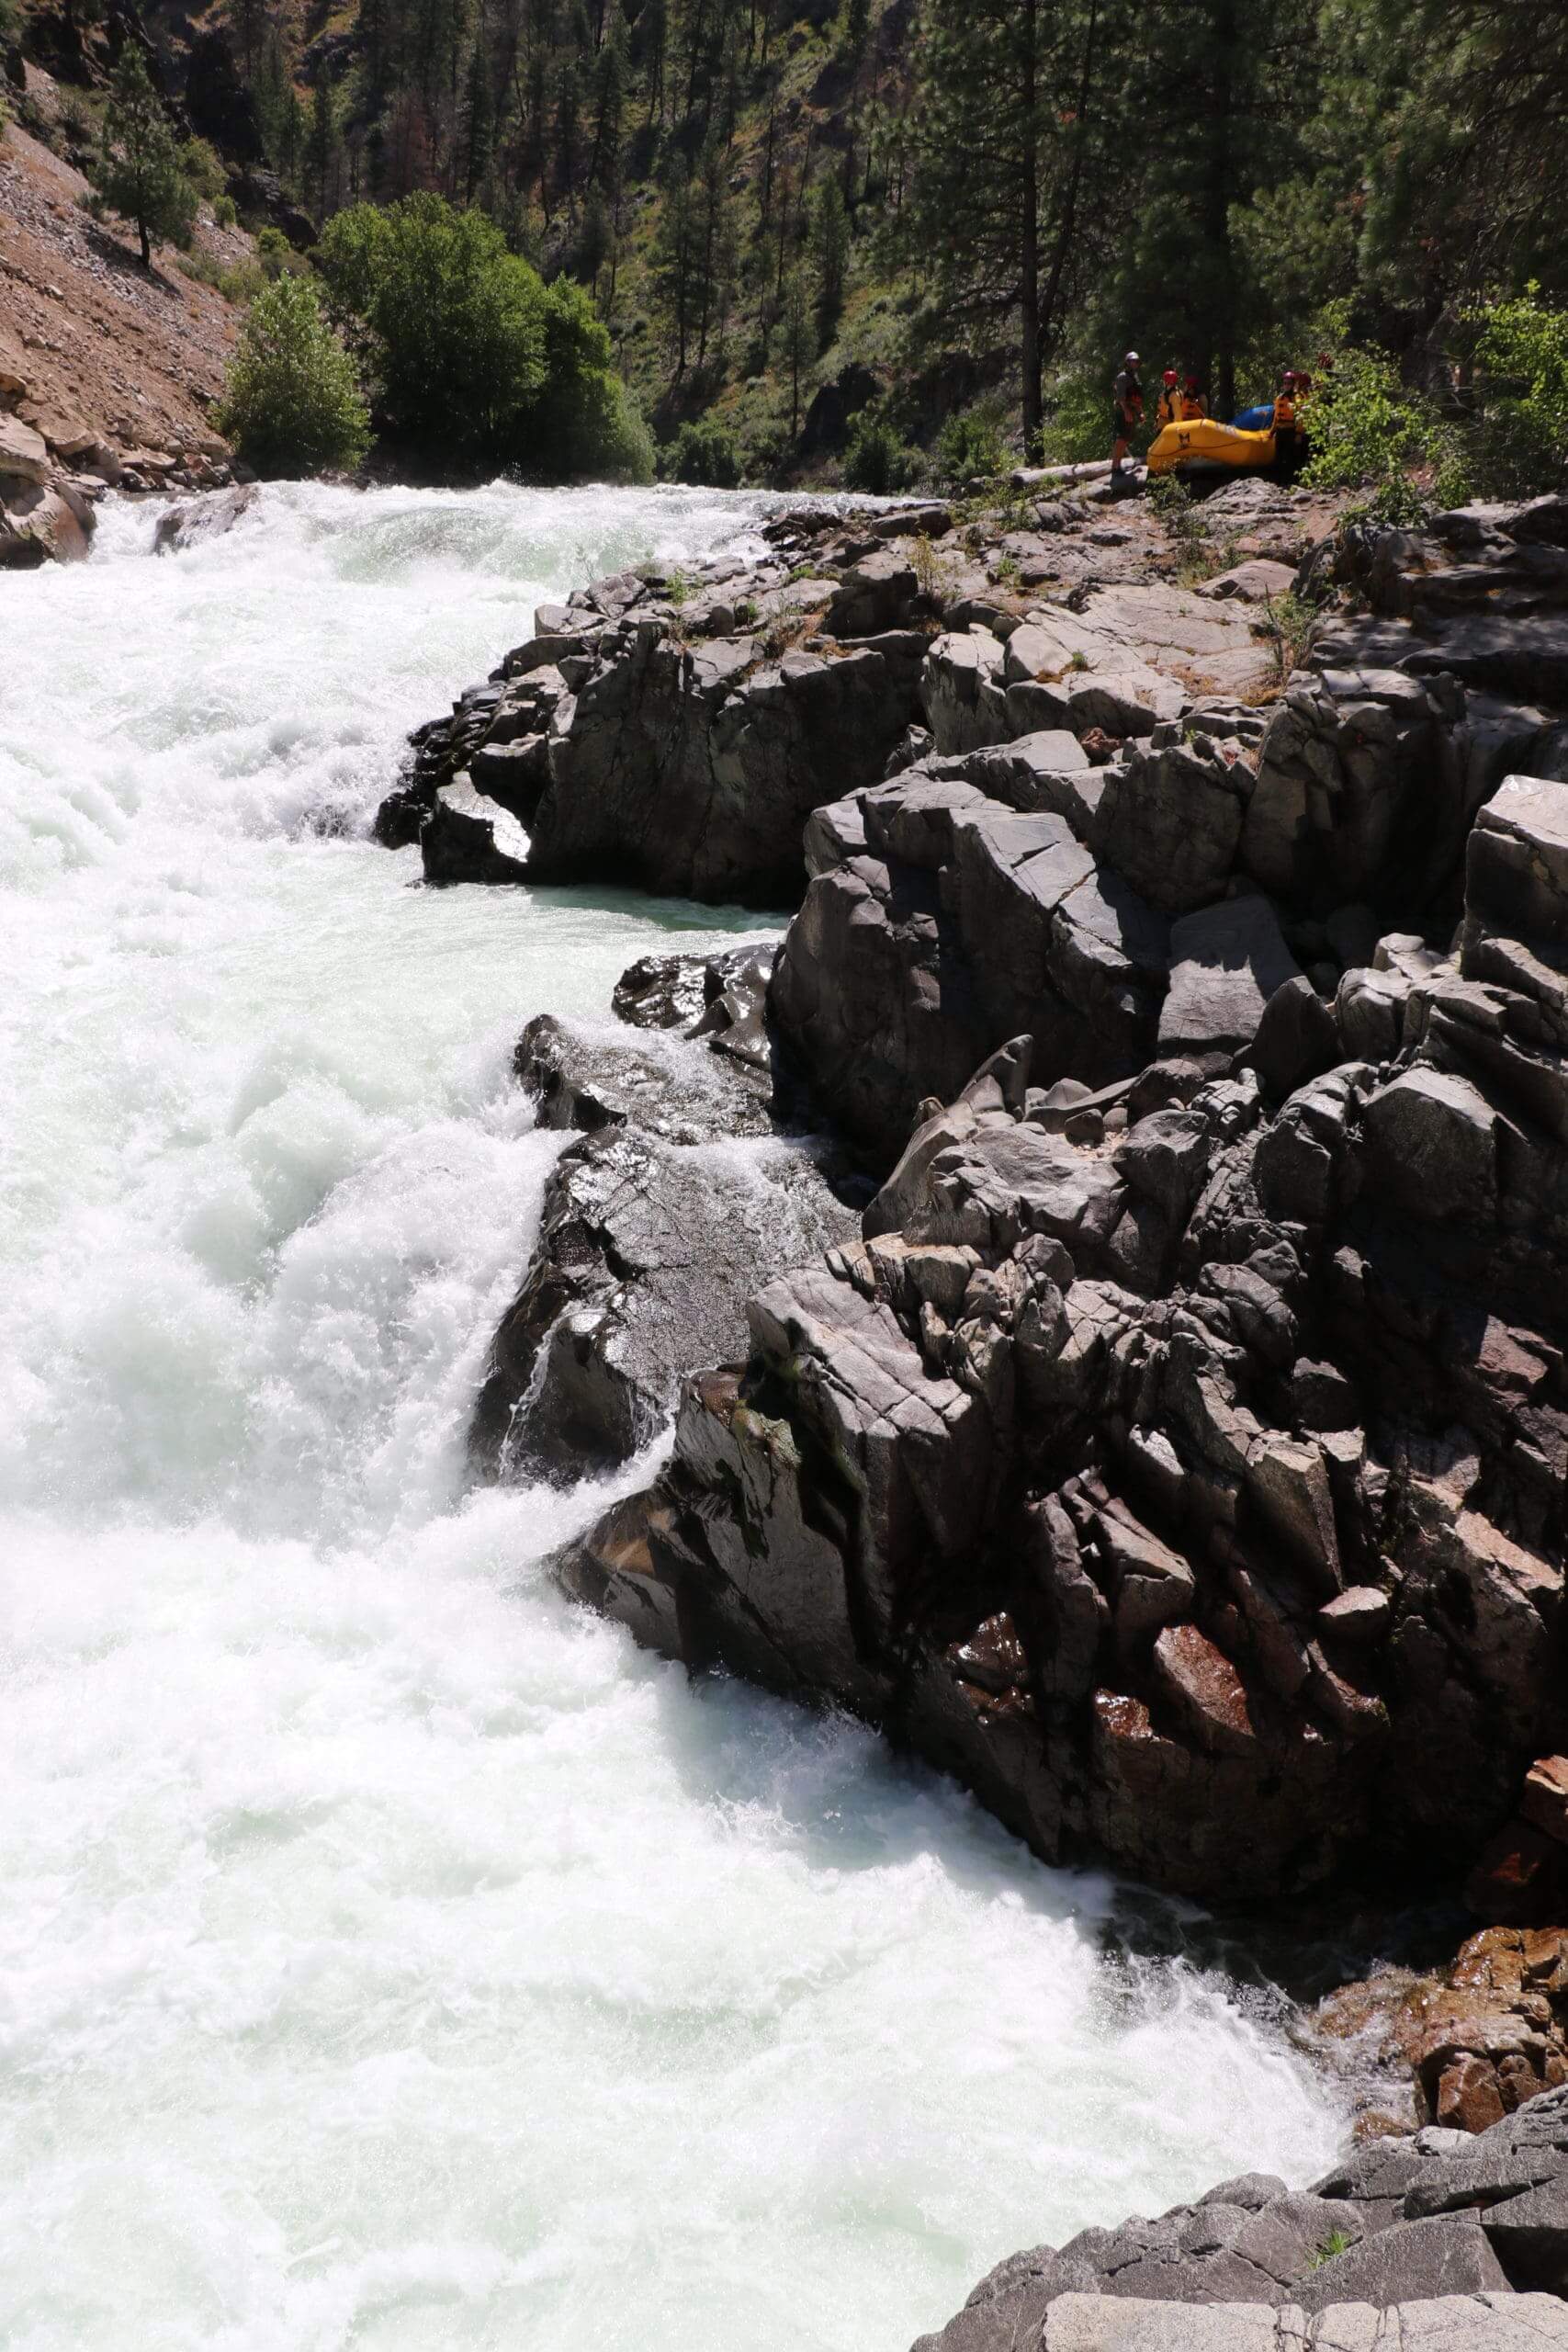 Whitewater river with rocks